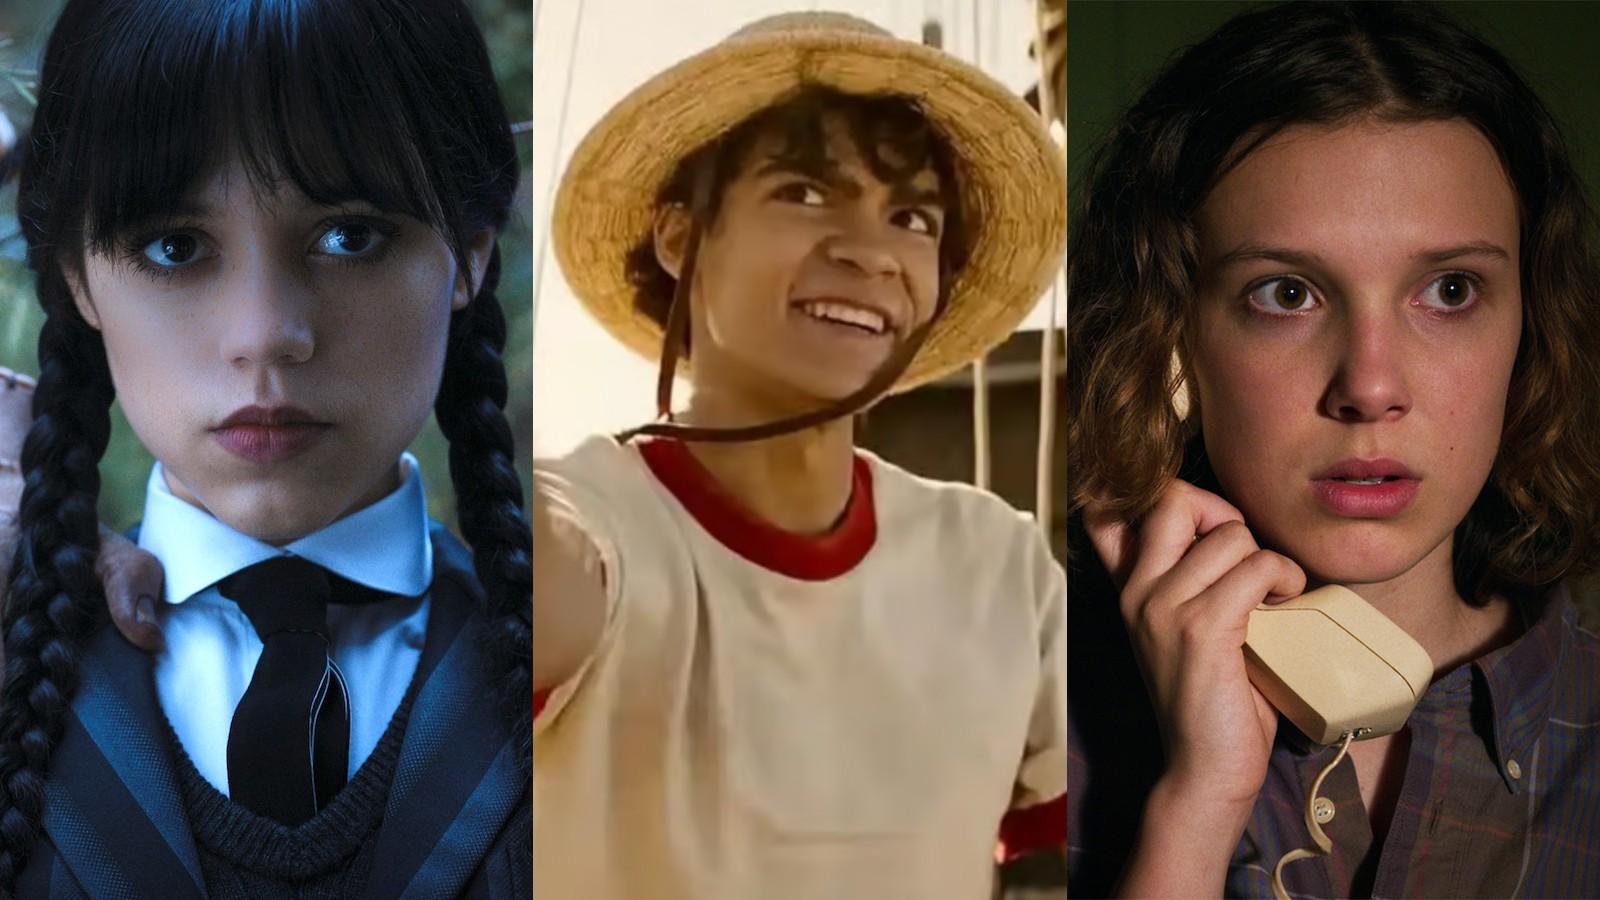 Still from Netflix shows Wednesday, One Piece live-action, and Stranger Things